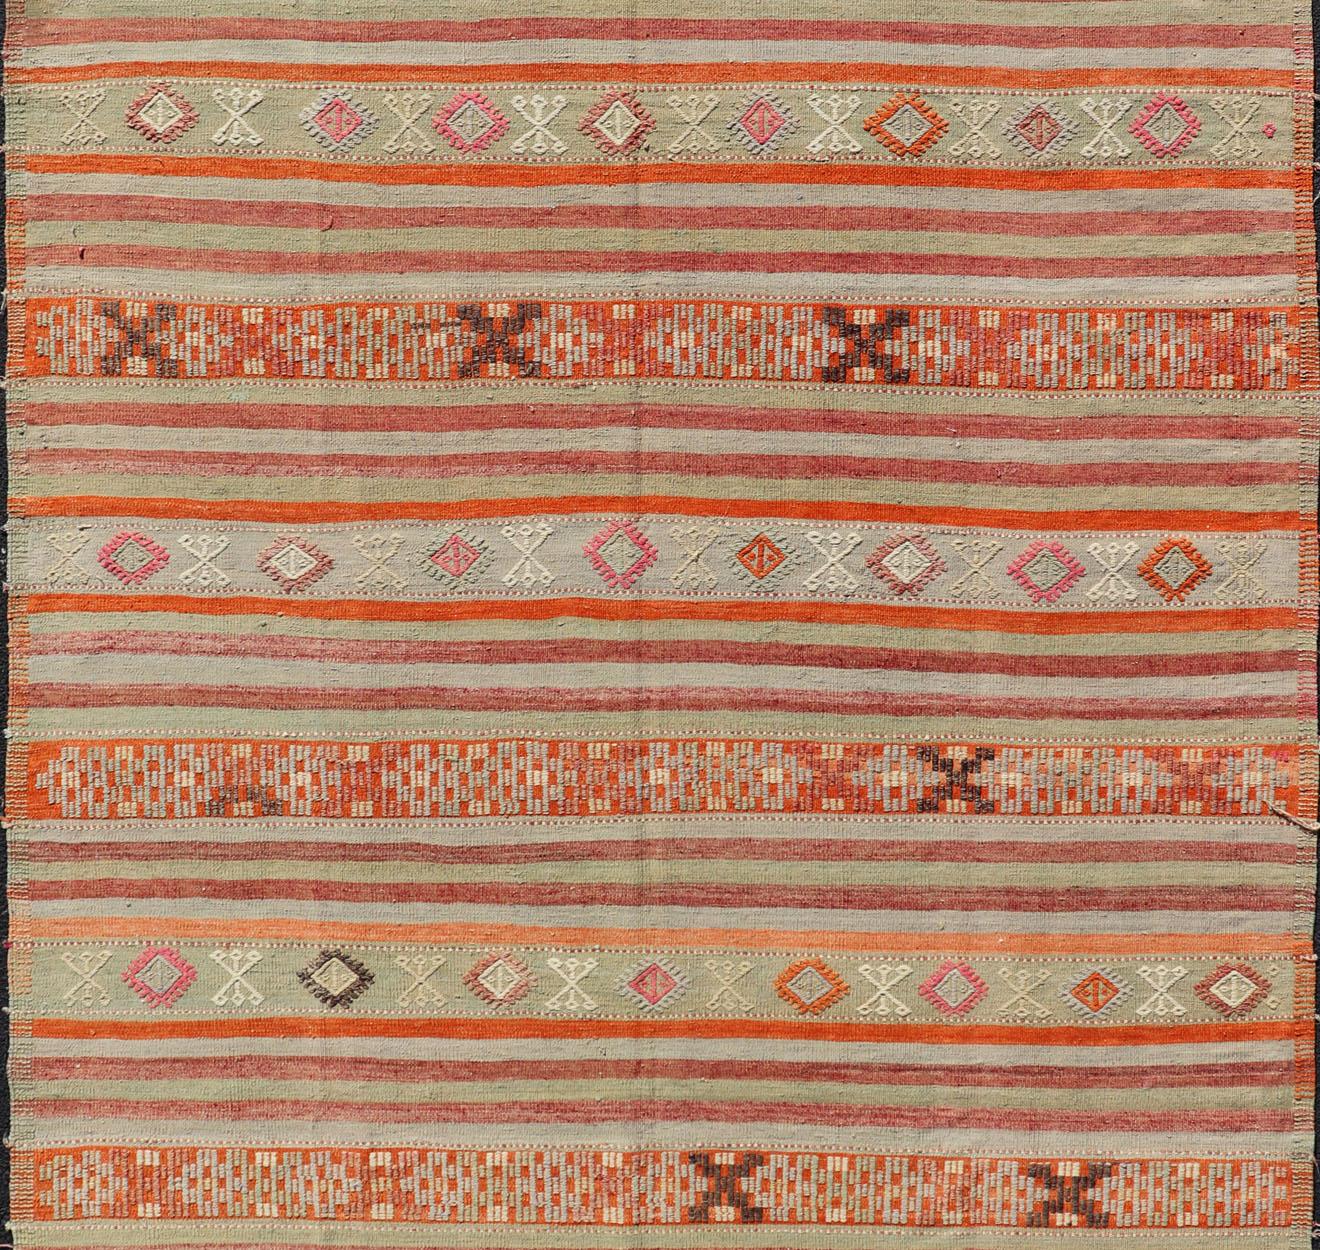 Hand-Woven Vintage Turkish Kilim with Colorful Stripes in Orange, Lt. green, red & gray  For Sale